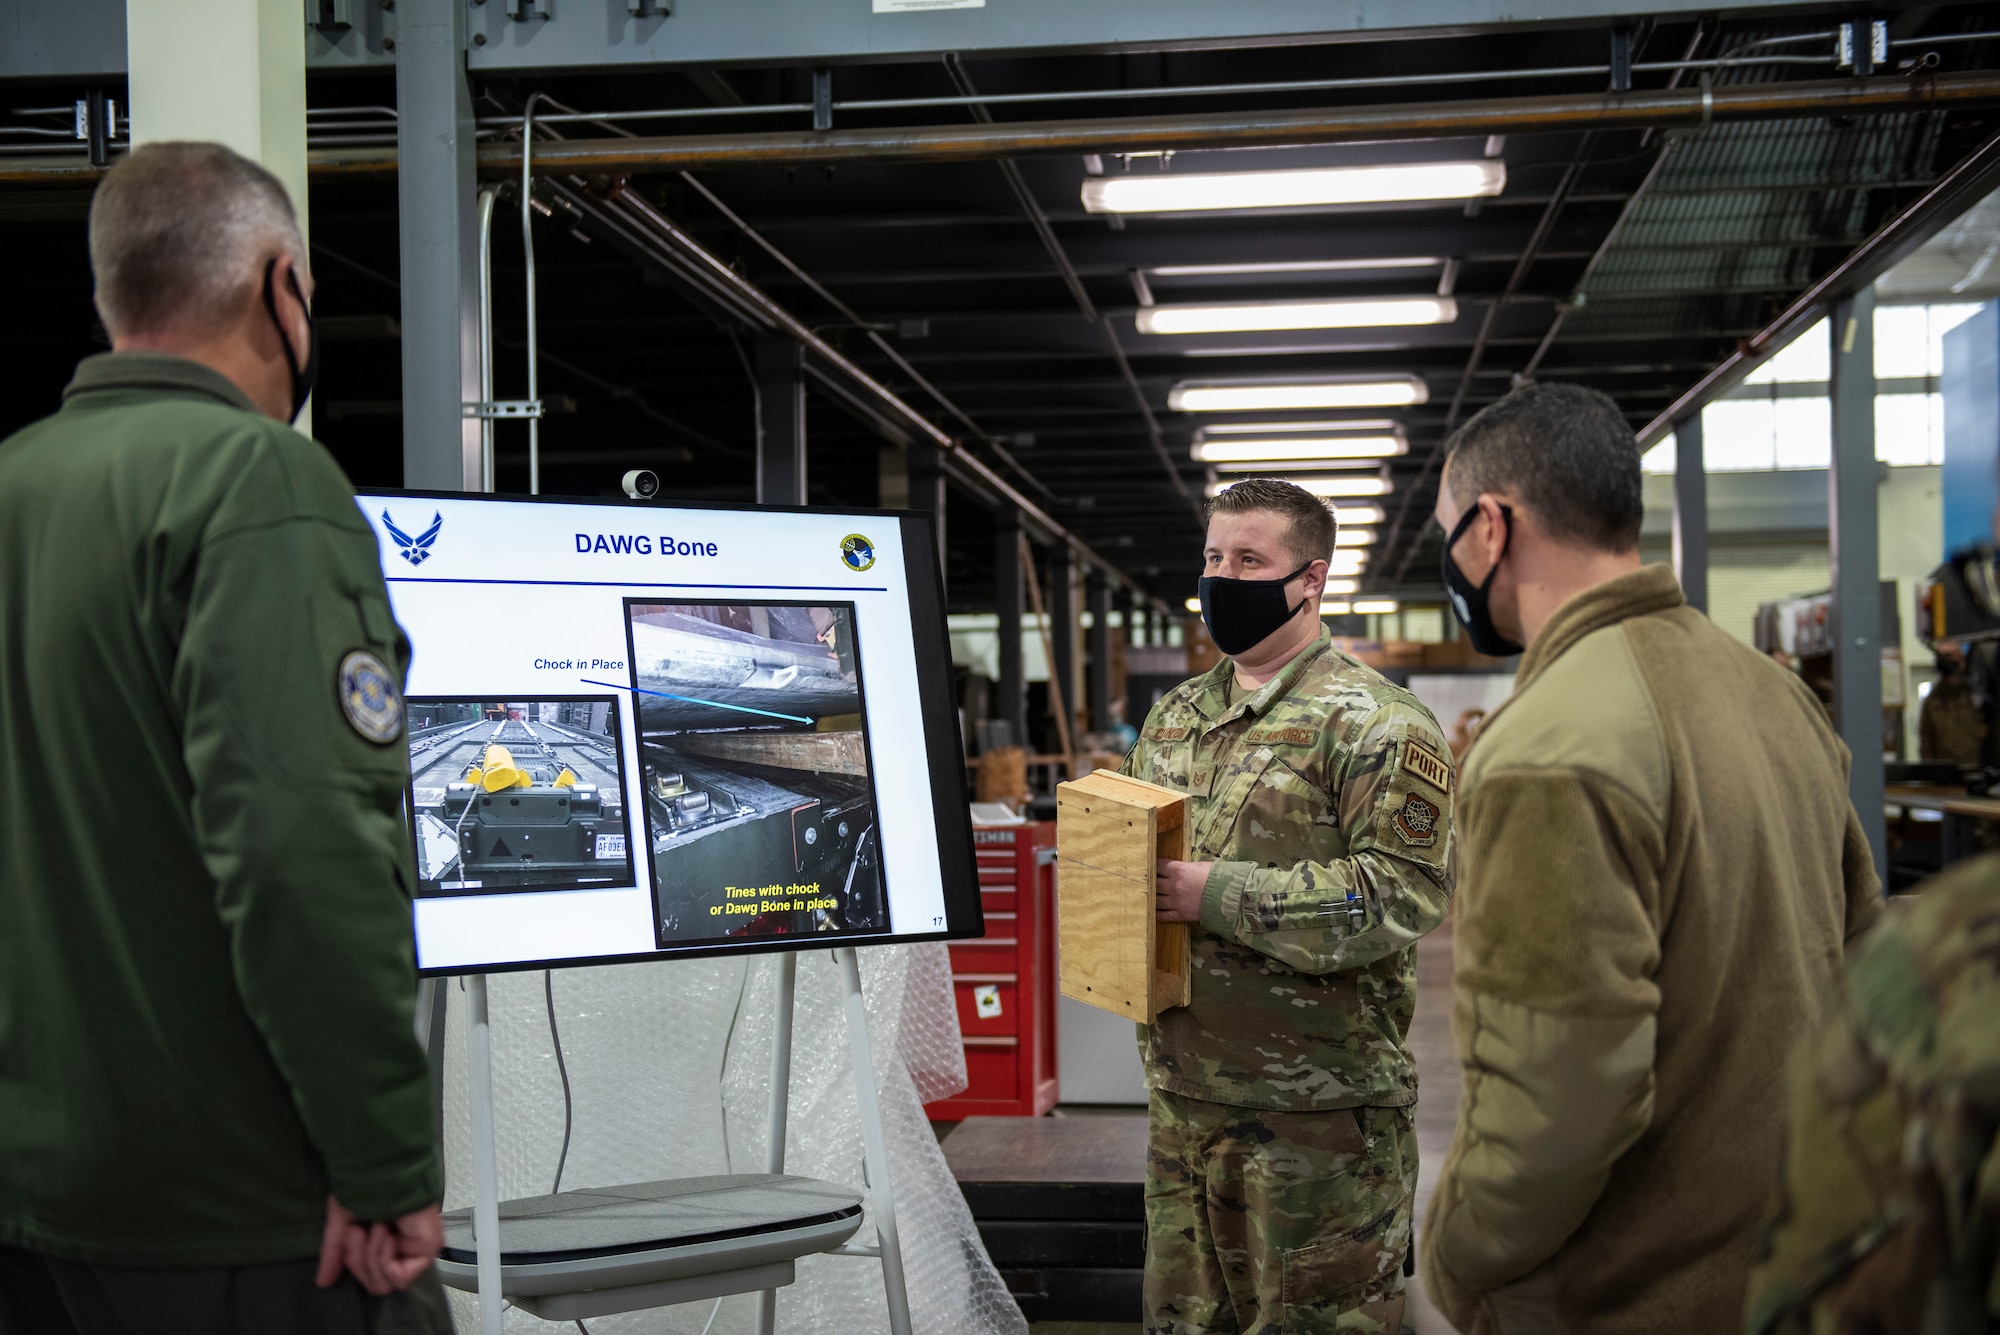 Tech. Sgt. Daniel Clanton (middle), 92nd Logistics Readiness Squadron non-commissioned officer-in-charge of Air Transportation Function, showcases an innovative tool to Gen. Mike Minihan, Air Mobility Command commander (left), and Chief Master Sgt. Brian Kruzelnick, AMC command chief (right), during a base tour at Fairchild Air Force Base, Washington, Jan. 6, 2022. Clanton explained the safety benefits of the ‘DAWG Bone’ tool to the AMC Command Team. (U.S. Air Force photo by Amn Jenna A. Bond)